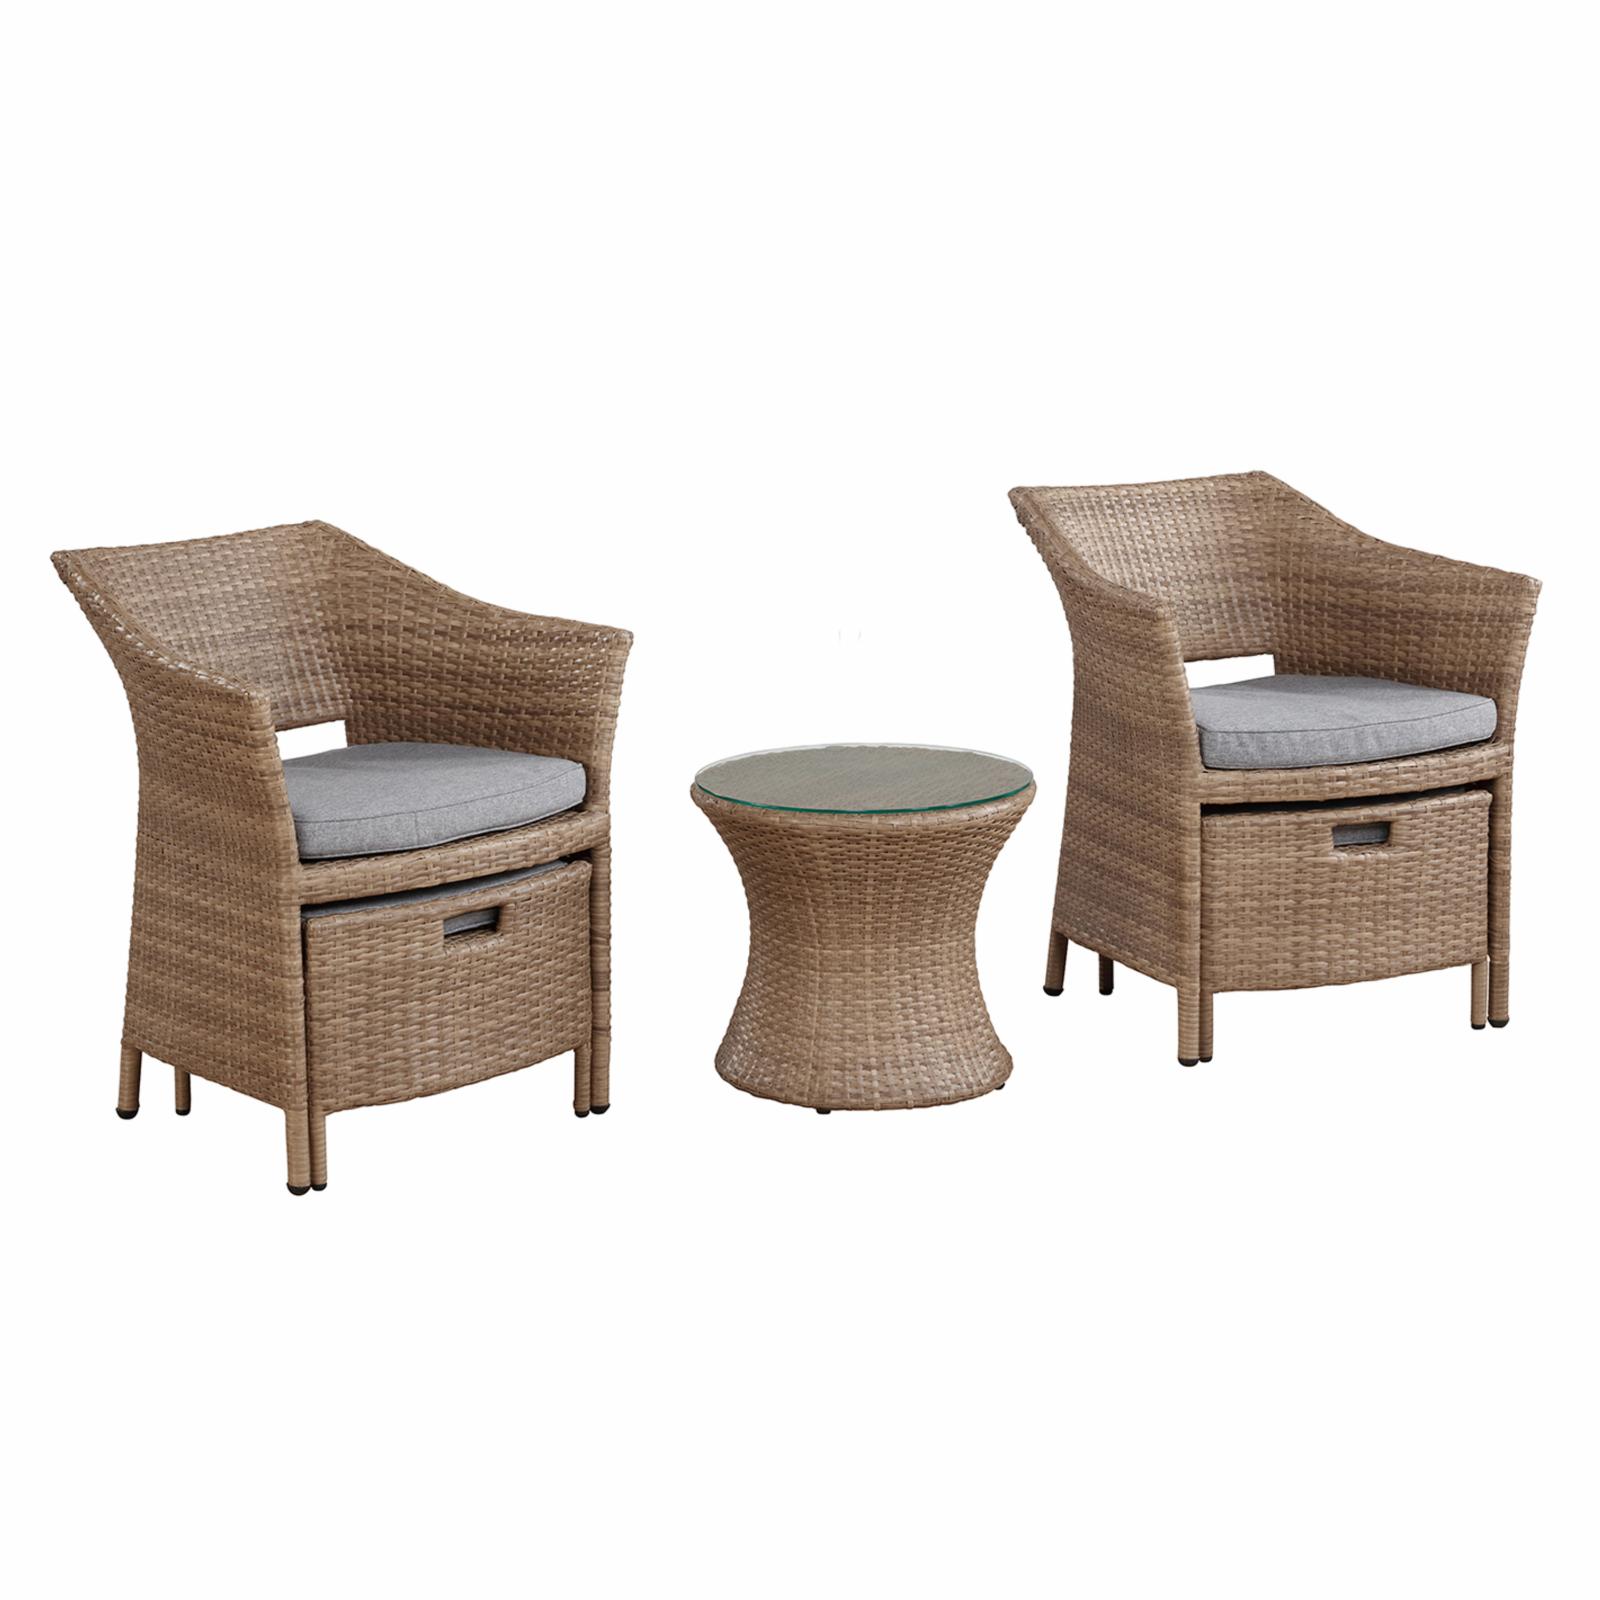 Kokoli All-Weather Conversation Set with Set of 2 Chairs with Ottomans and 17"H Accent Table - image 3 of 9